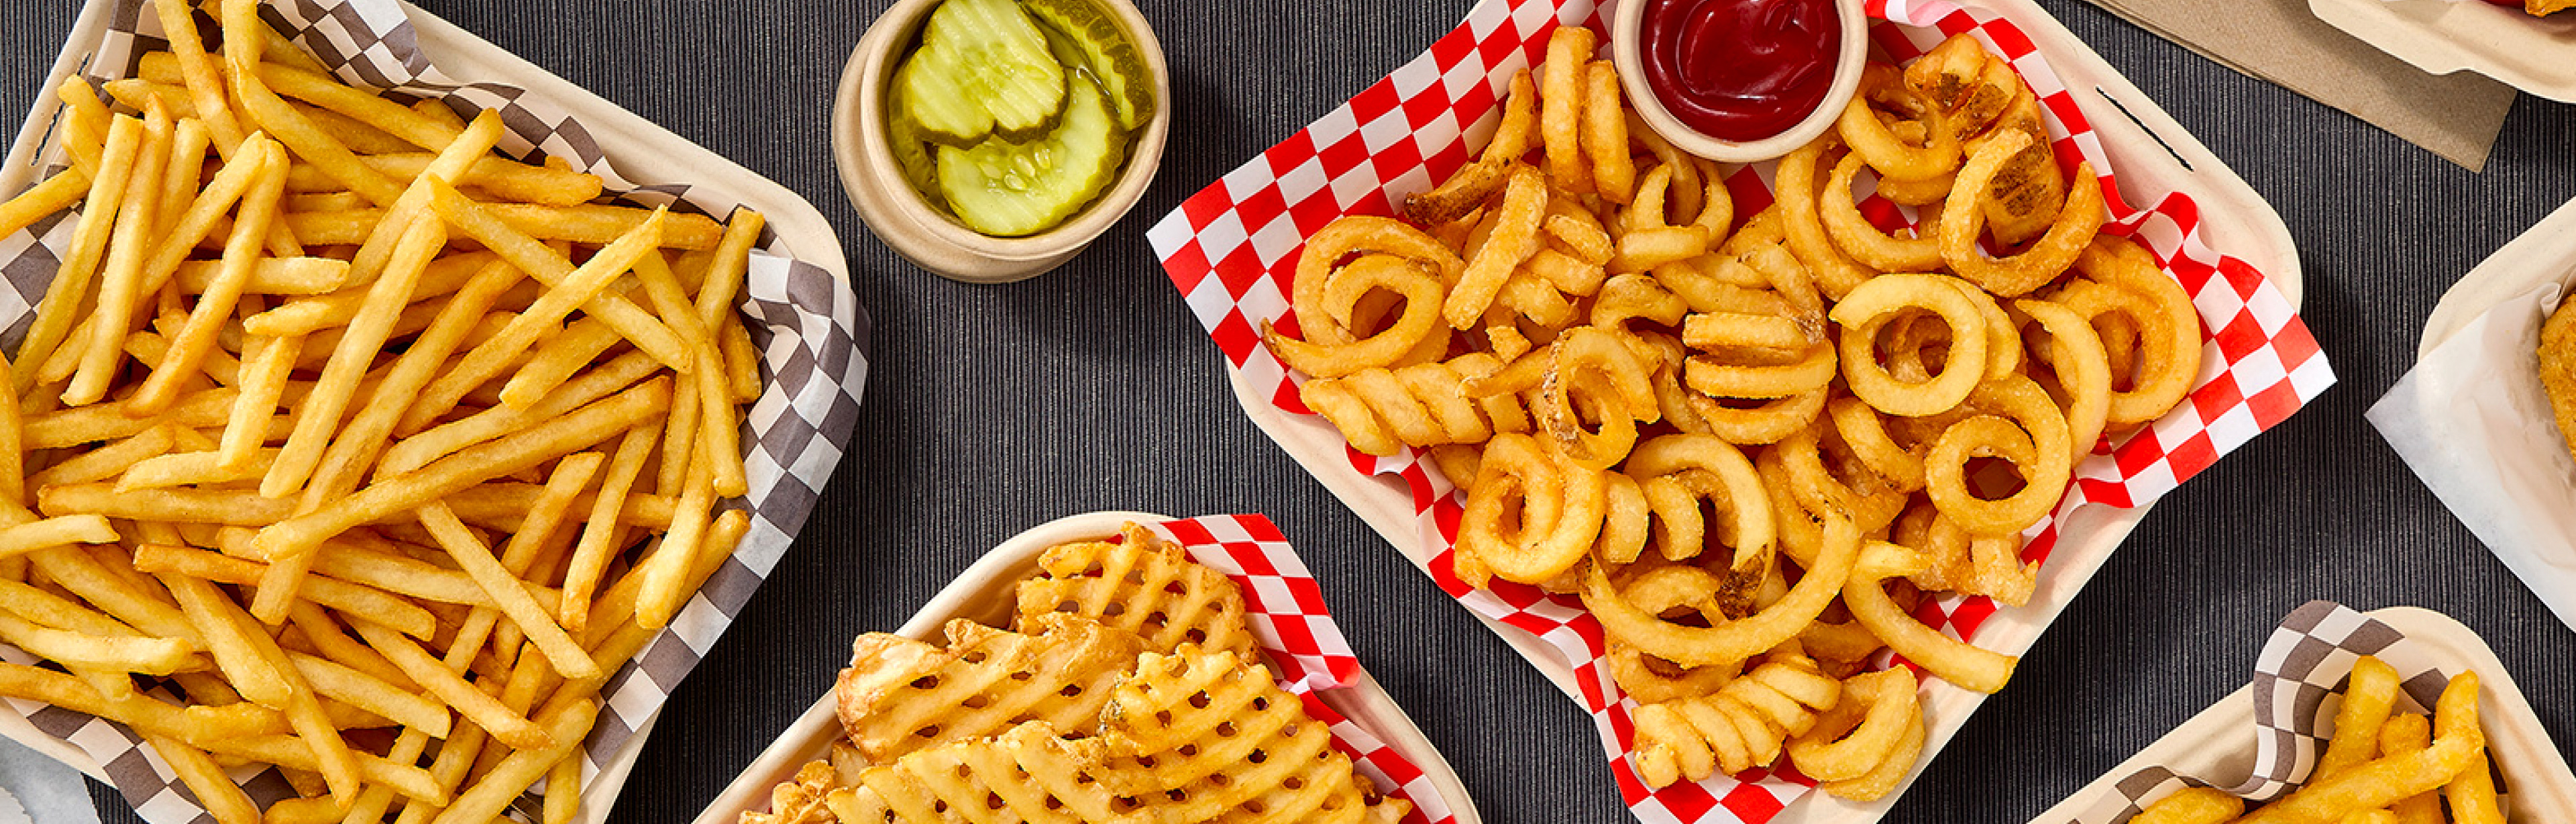 Various McCain® fries, including straight- cut, curly and waffle fries in a basket with a side of ketchup